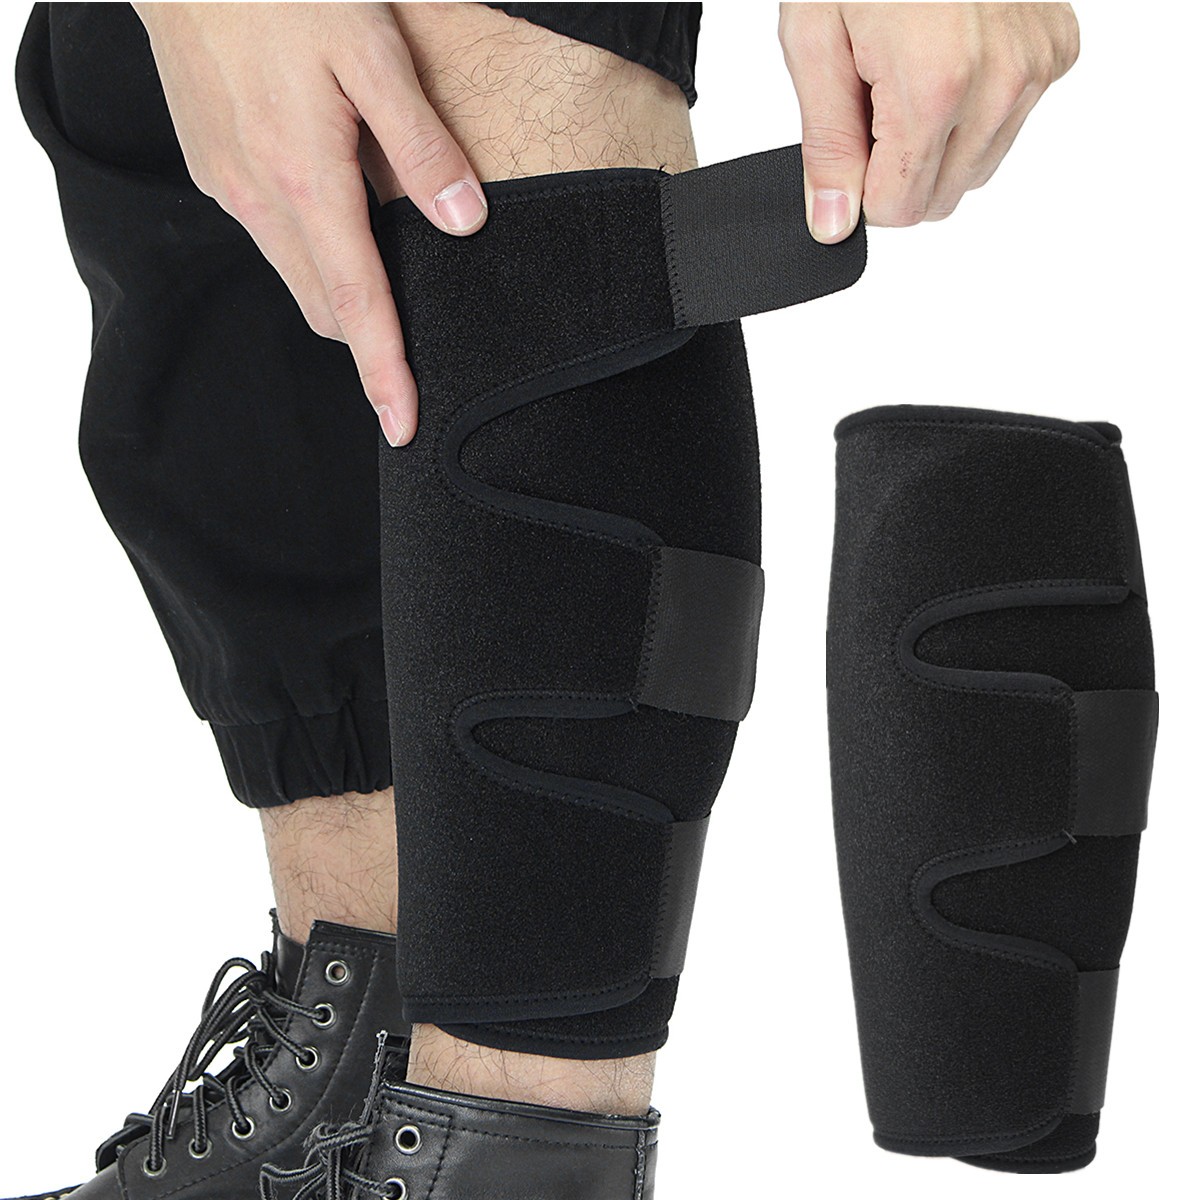 Calf Compression Brace Leg Support Wrap Muscle Pain Relief